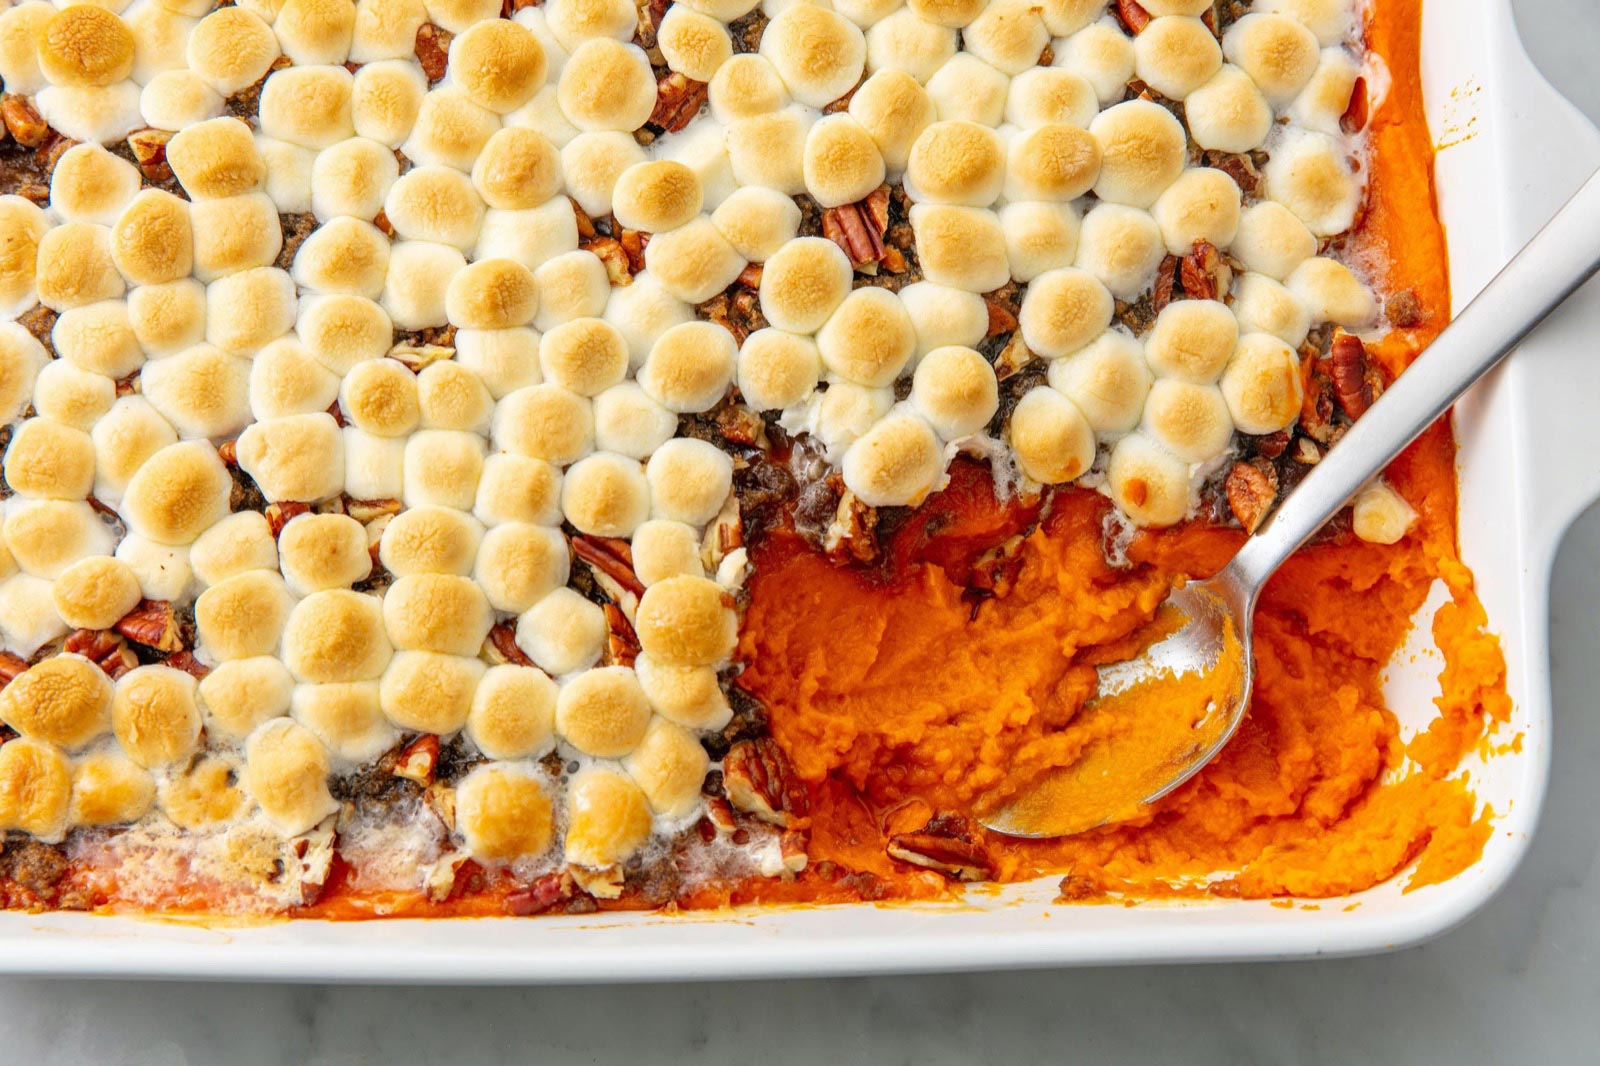 🍟 Believe It or Not, We Can Guess Your Age Just by How You Rate These Potato Dishes Sweet potato casserole with marshmallows